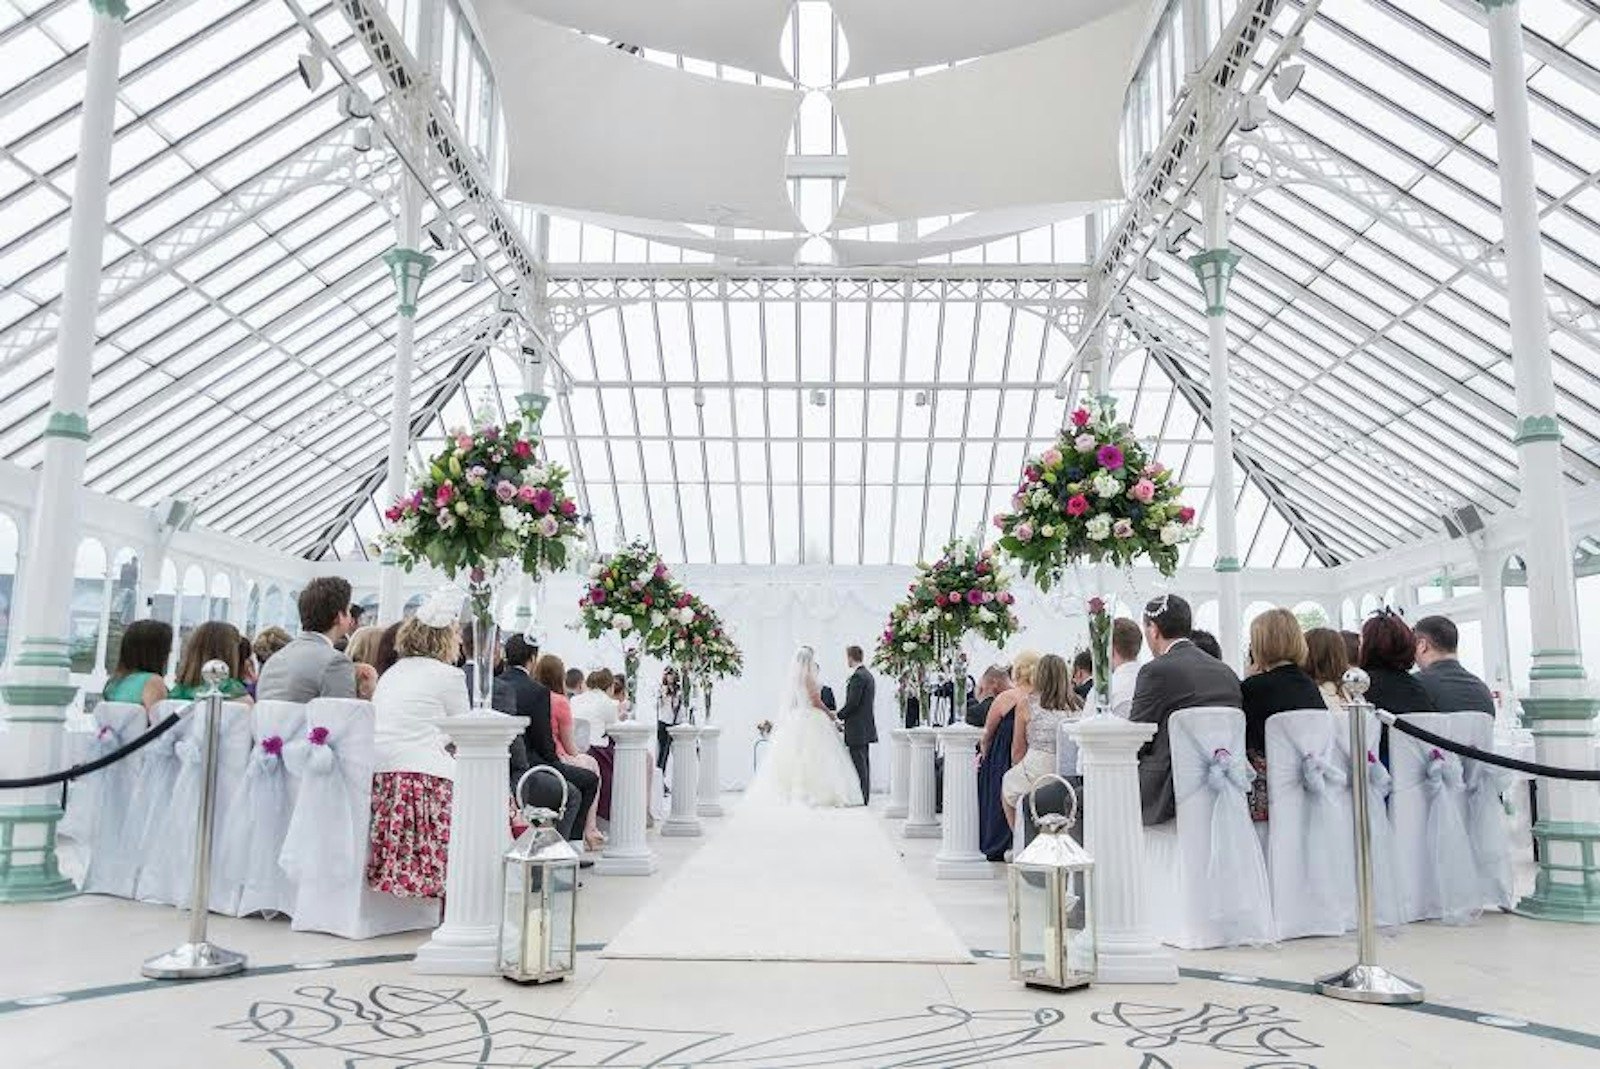 Wedding Venues in Liverpool - The Isla Gladstone Conservatory 